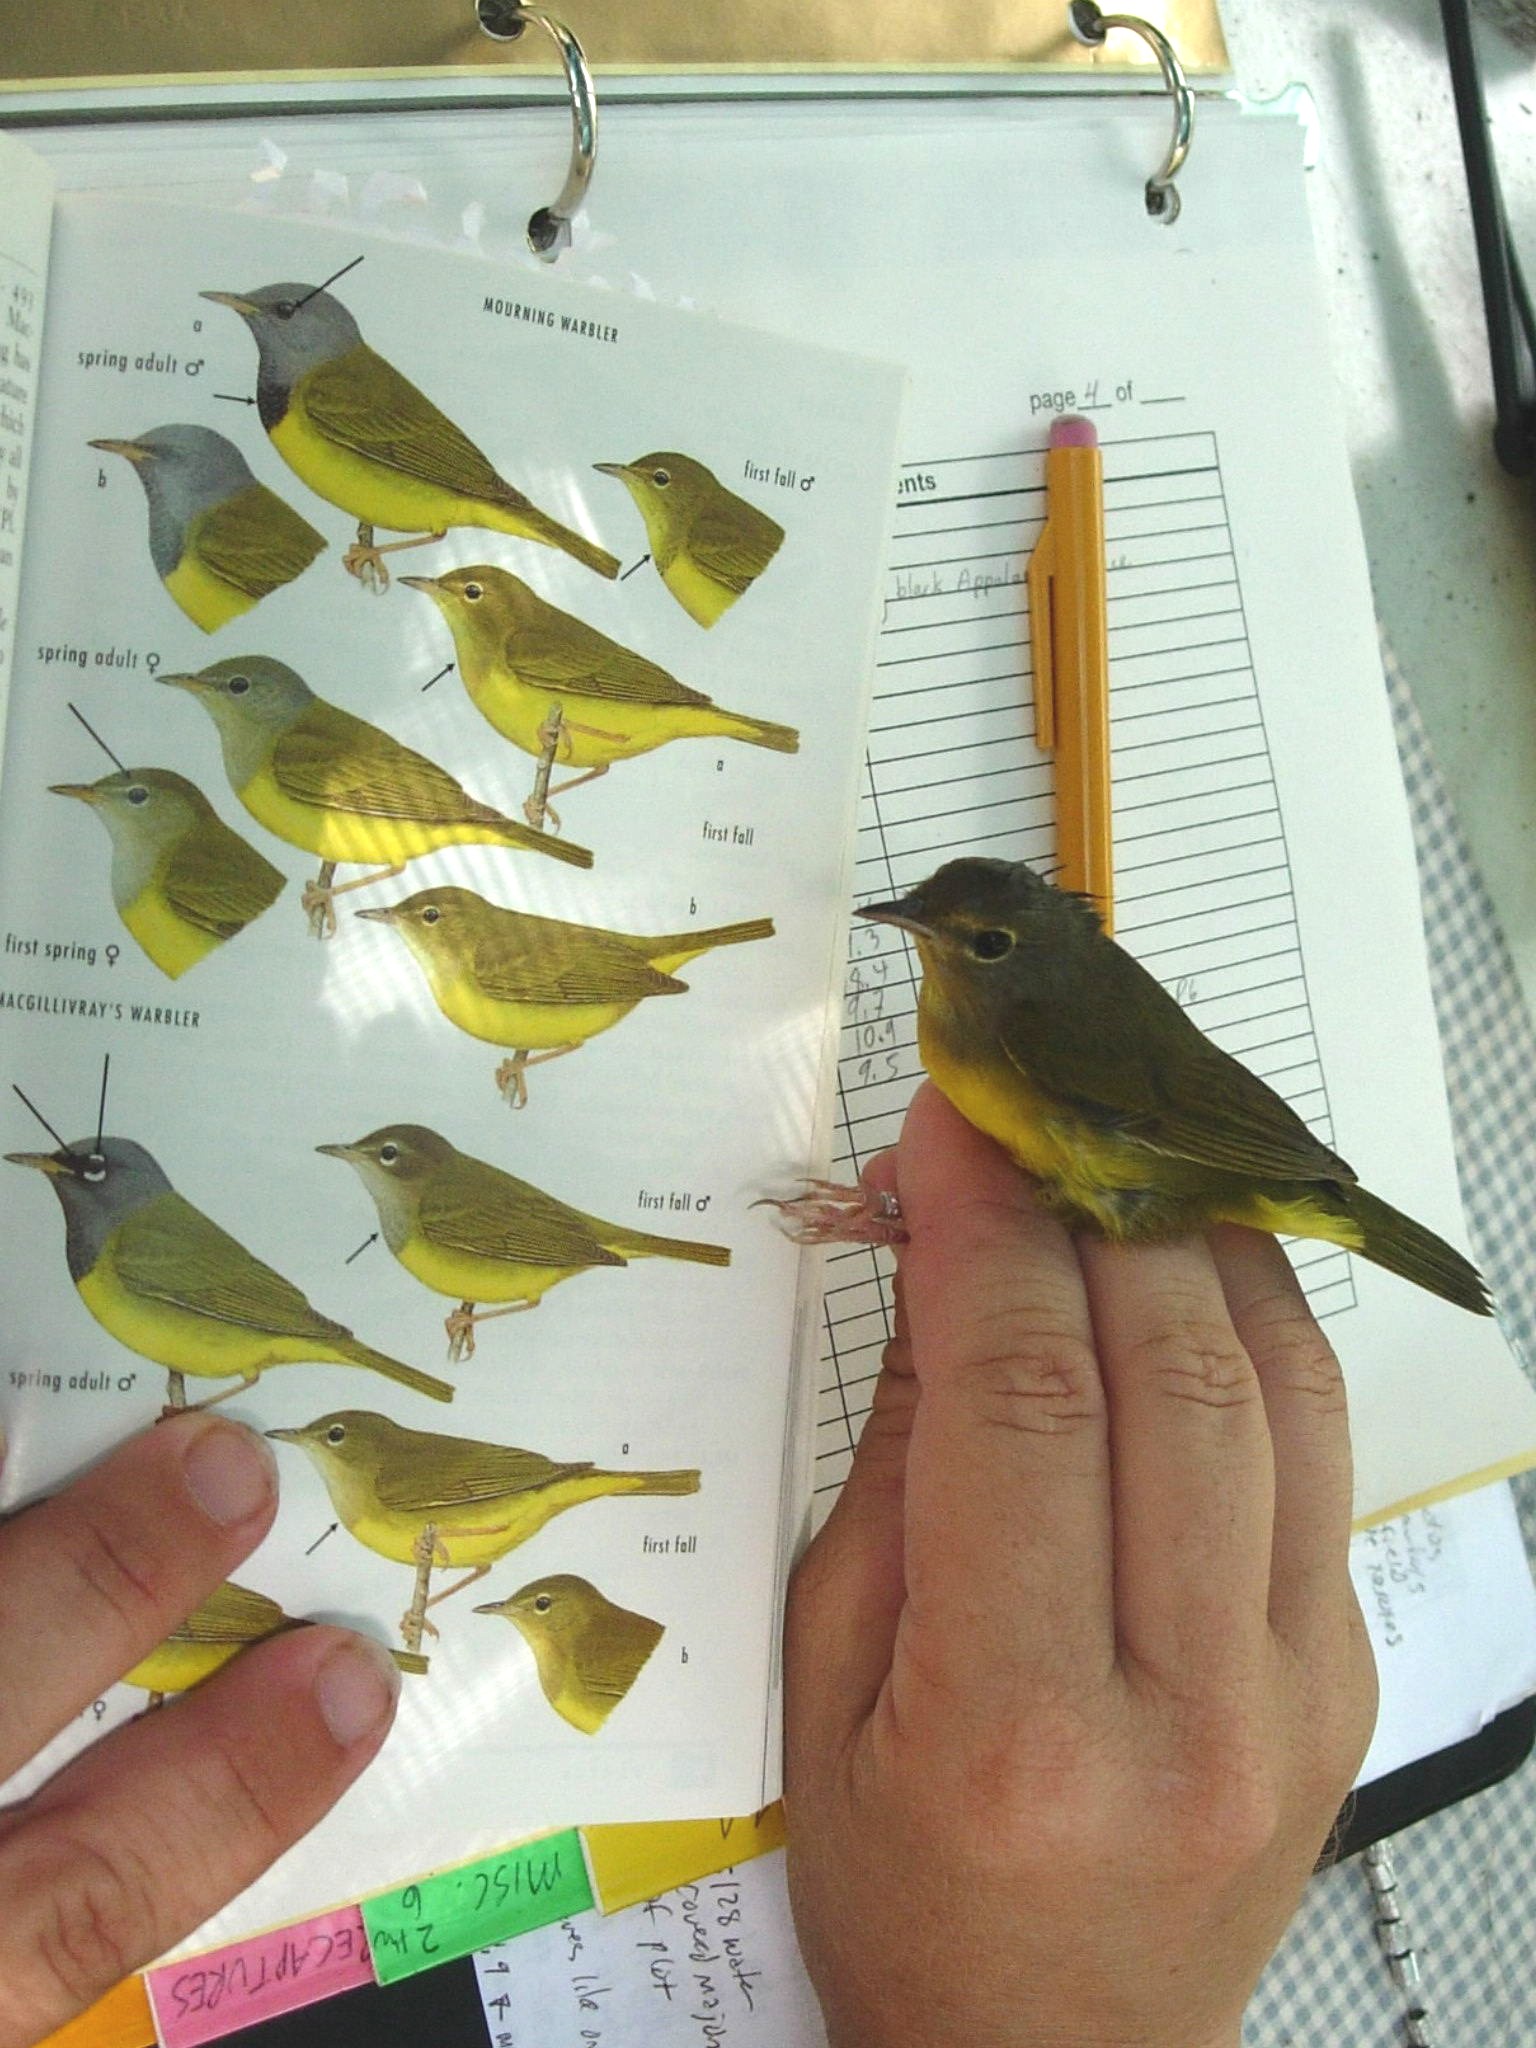 Mourning warbler in the hand.